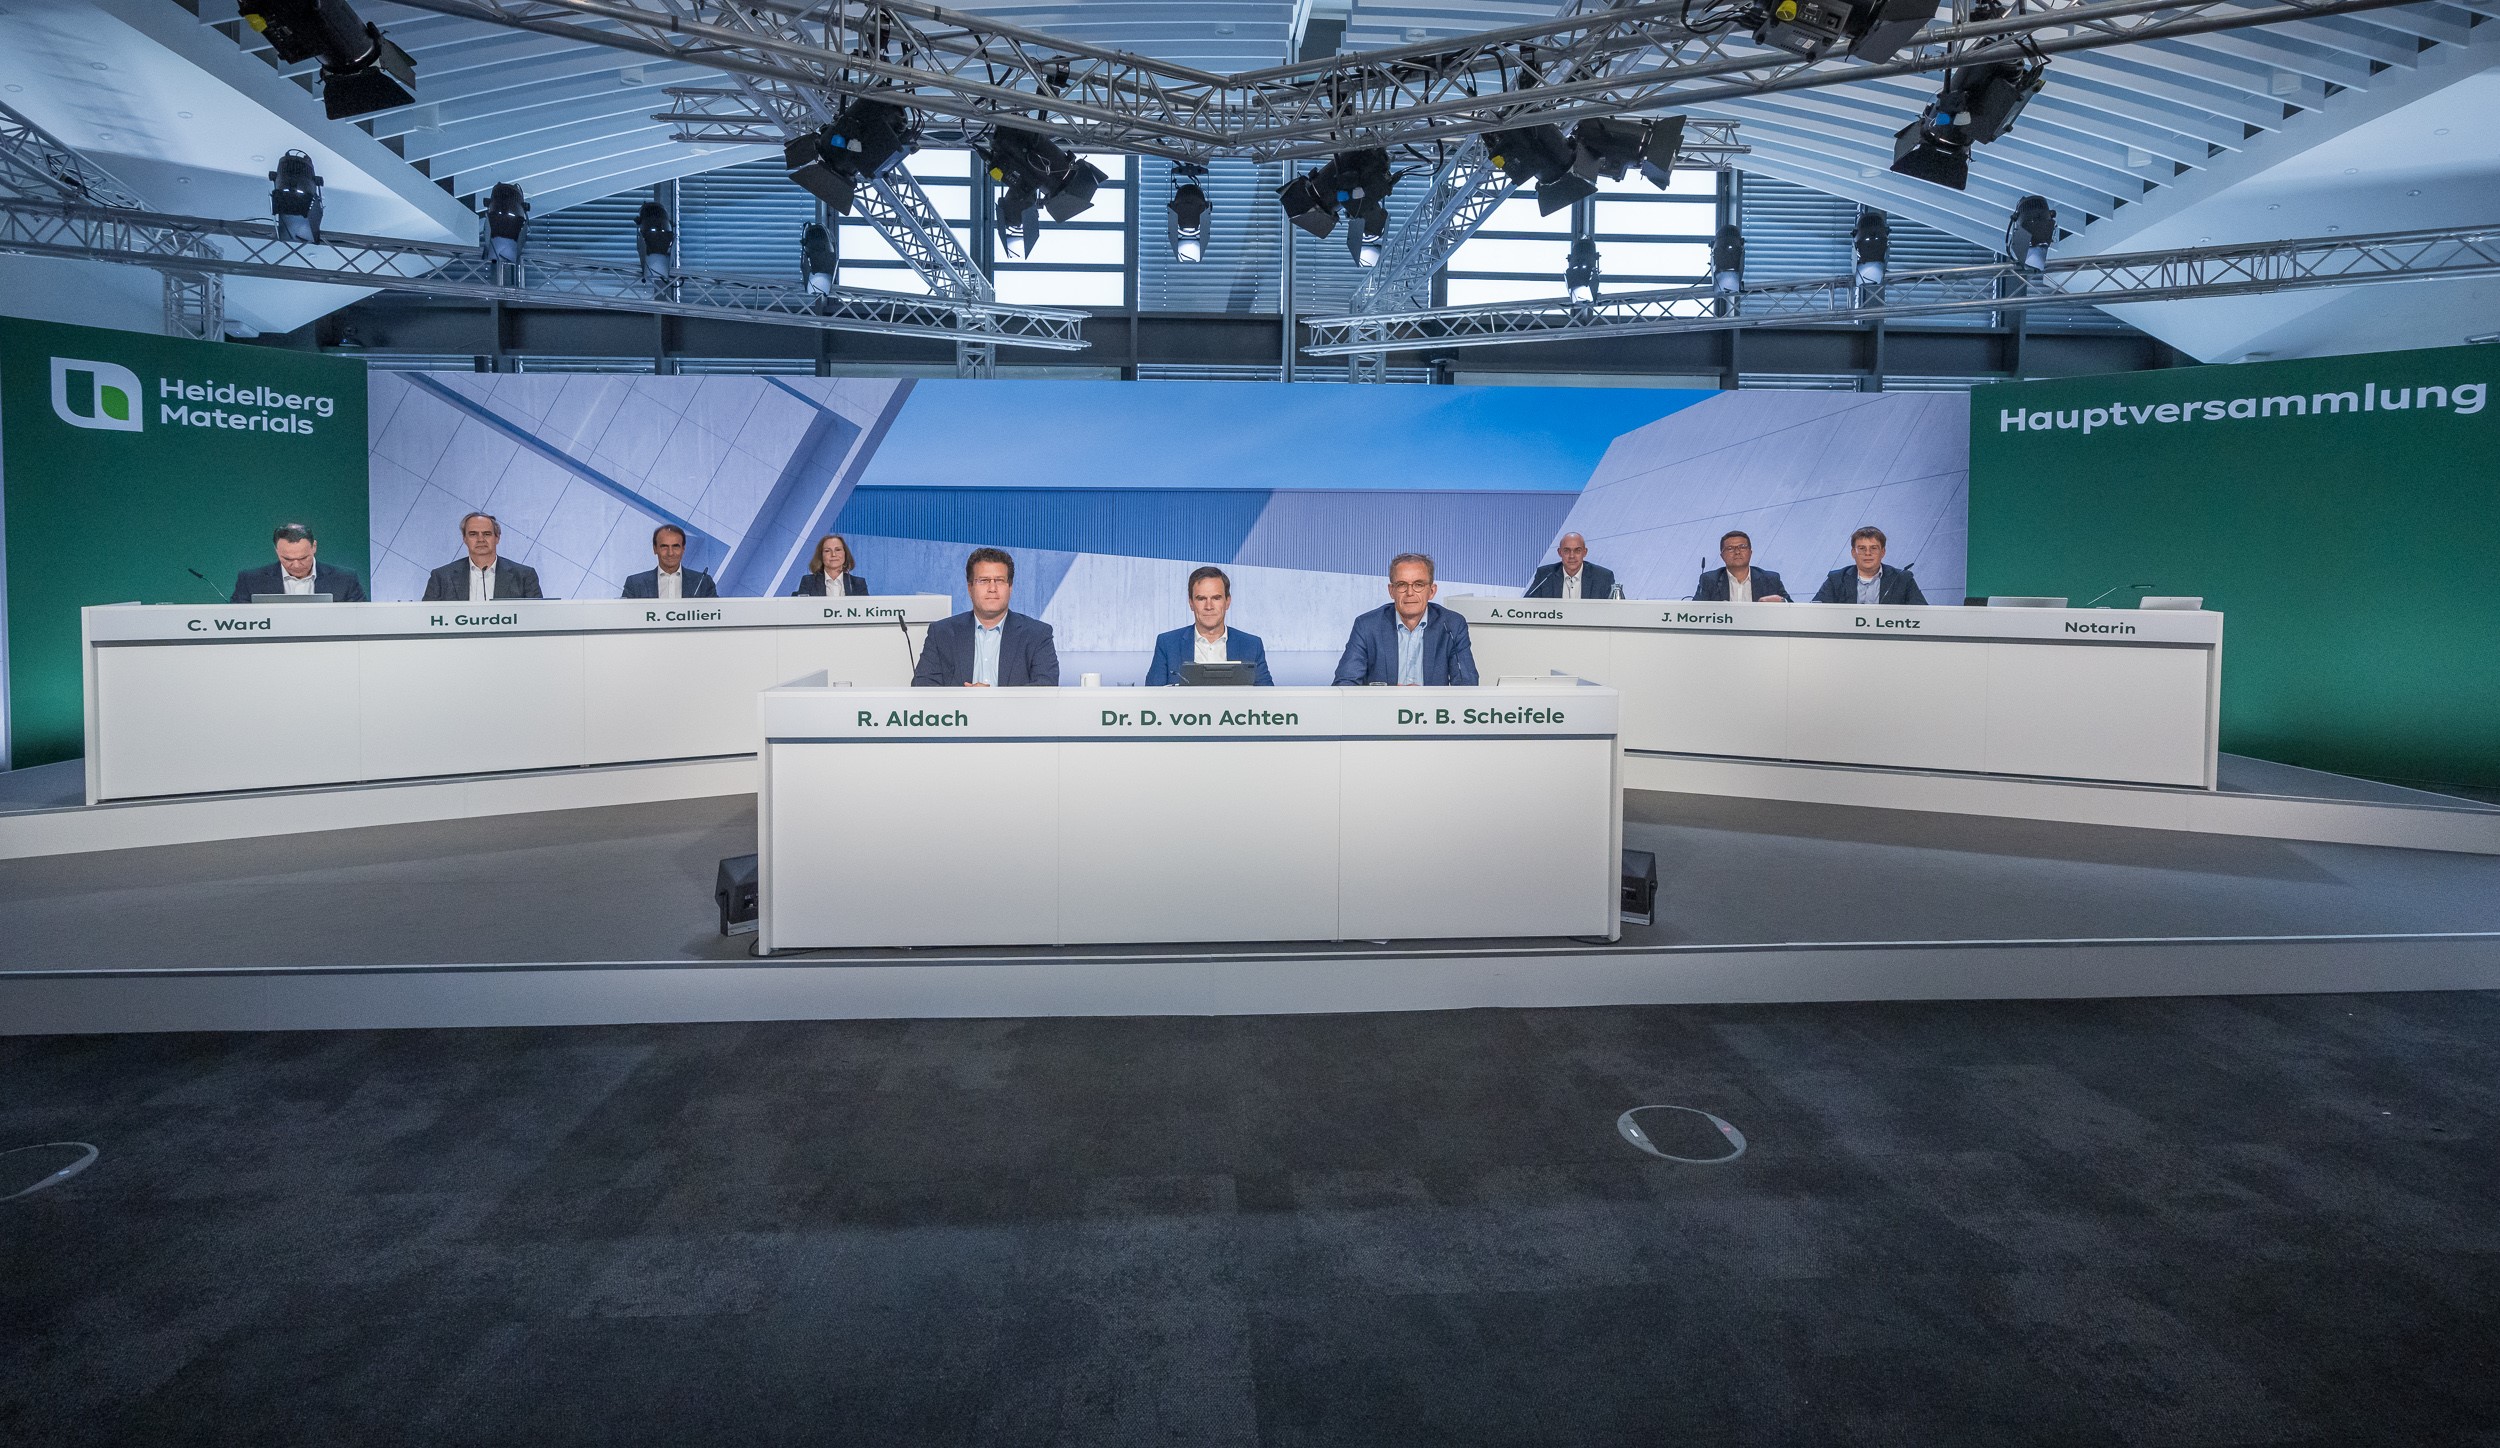 Members of the Executive Board and Supervisory Board sitting on a stage